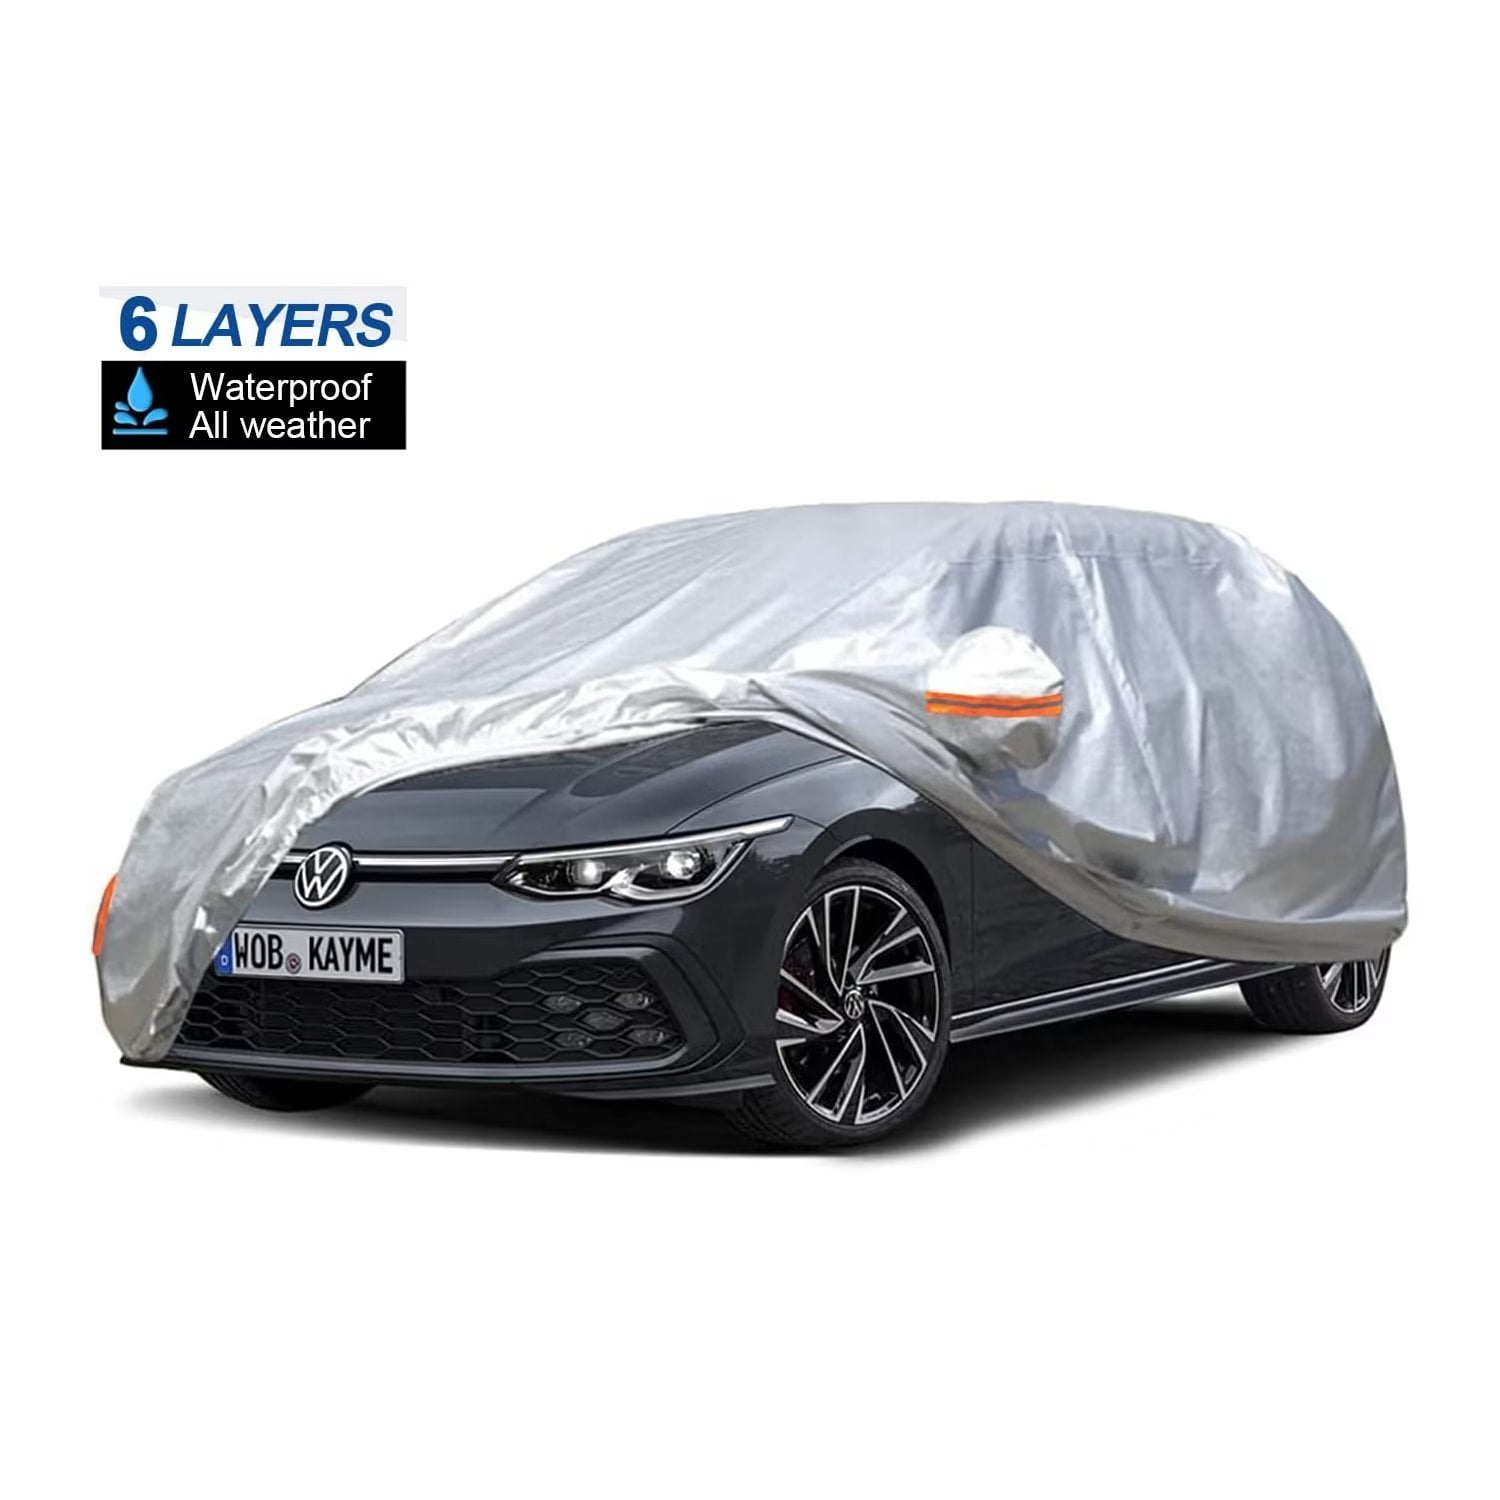 Hatchback Car Cover for Automobiles Waterproof All Weather, Size